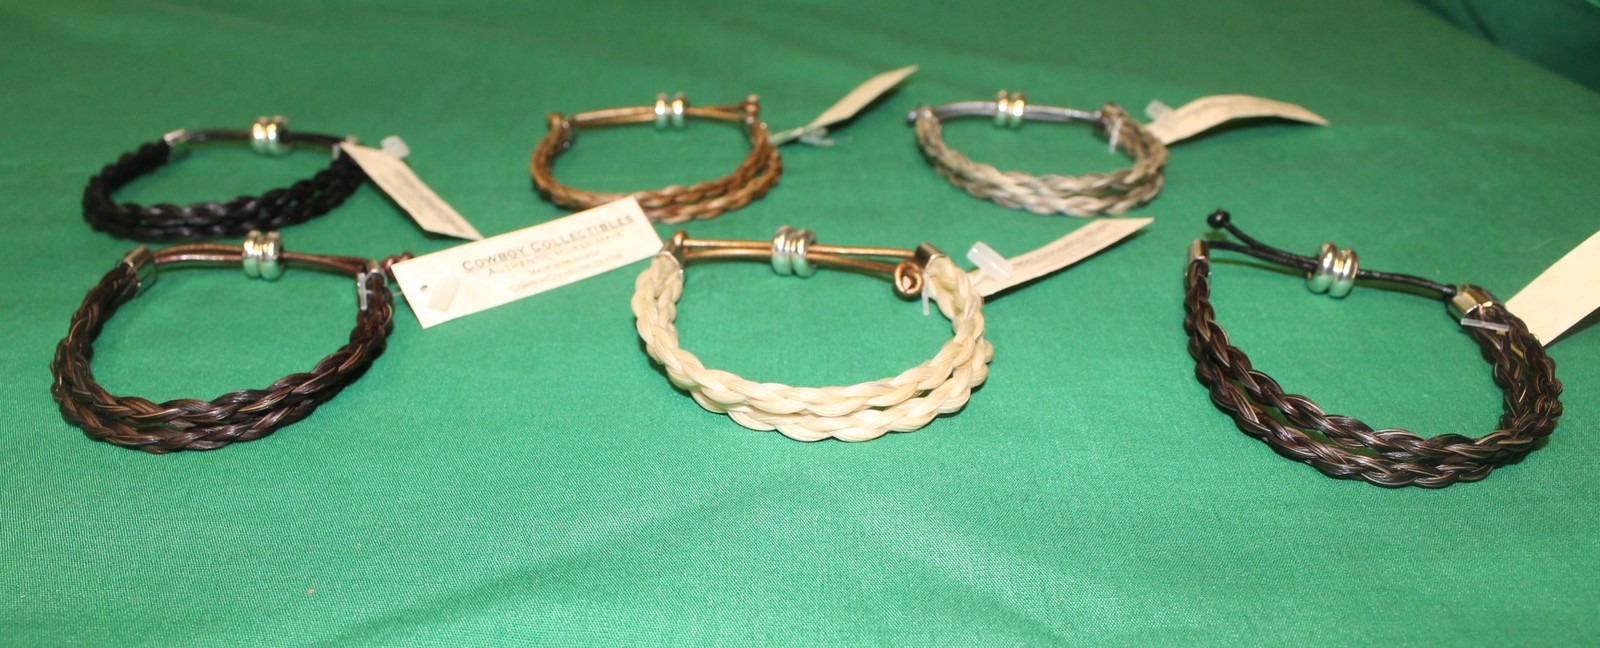 Equine Braided Horse Hair Bracelet Double Spiral Adjustable Cowboy Collectibles - $16.00